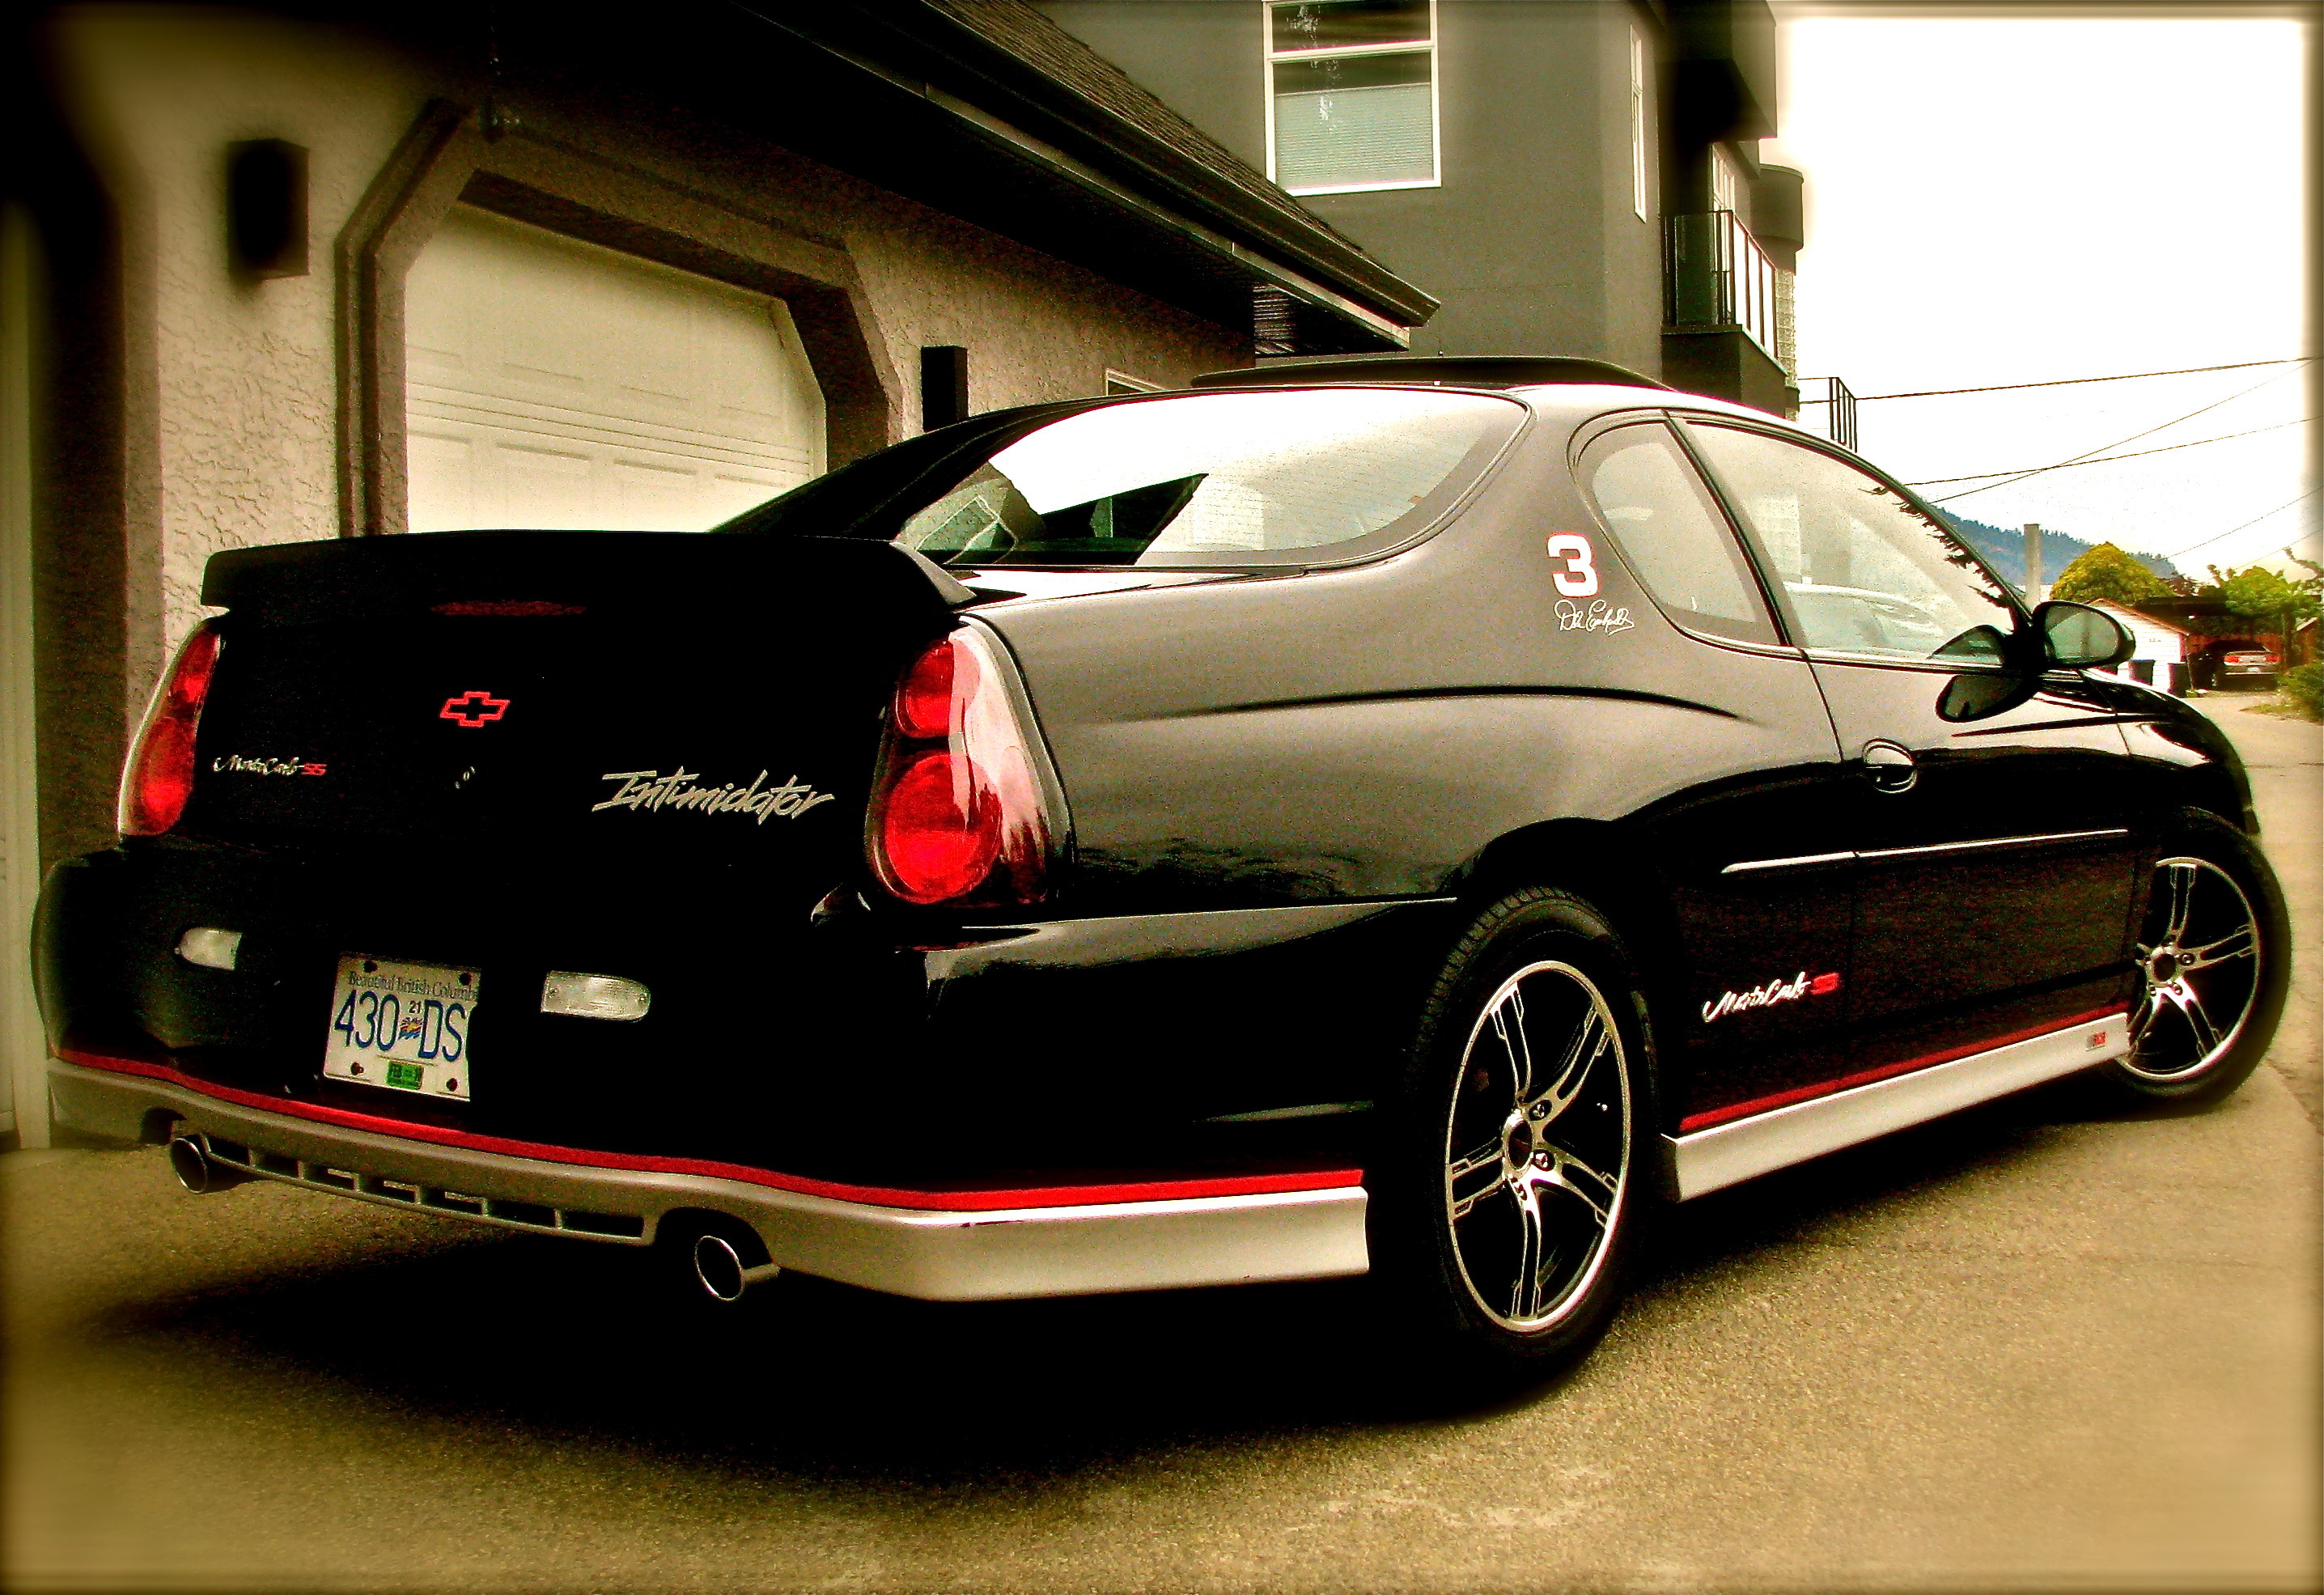 2872x1971 Photo of 2002 Monte Carlo SS (Dale Earnhardt Edition) why do I love this